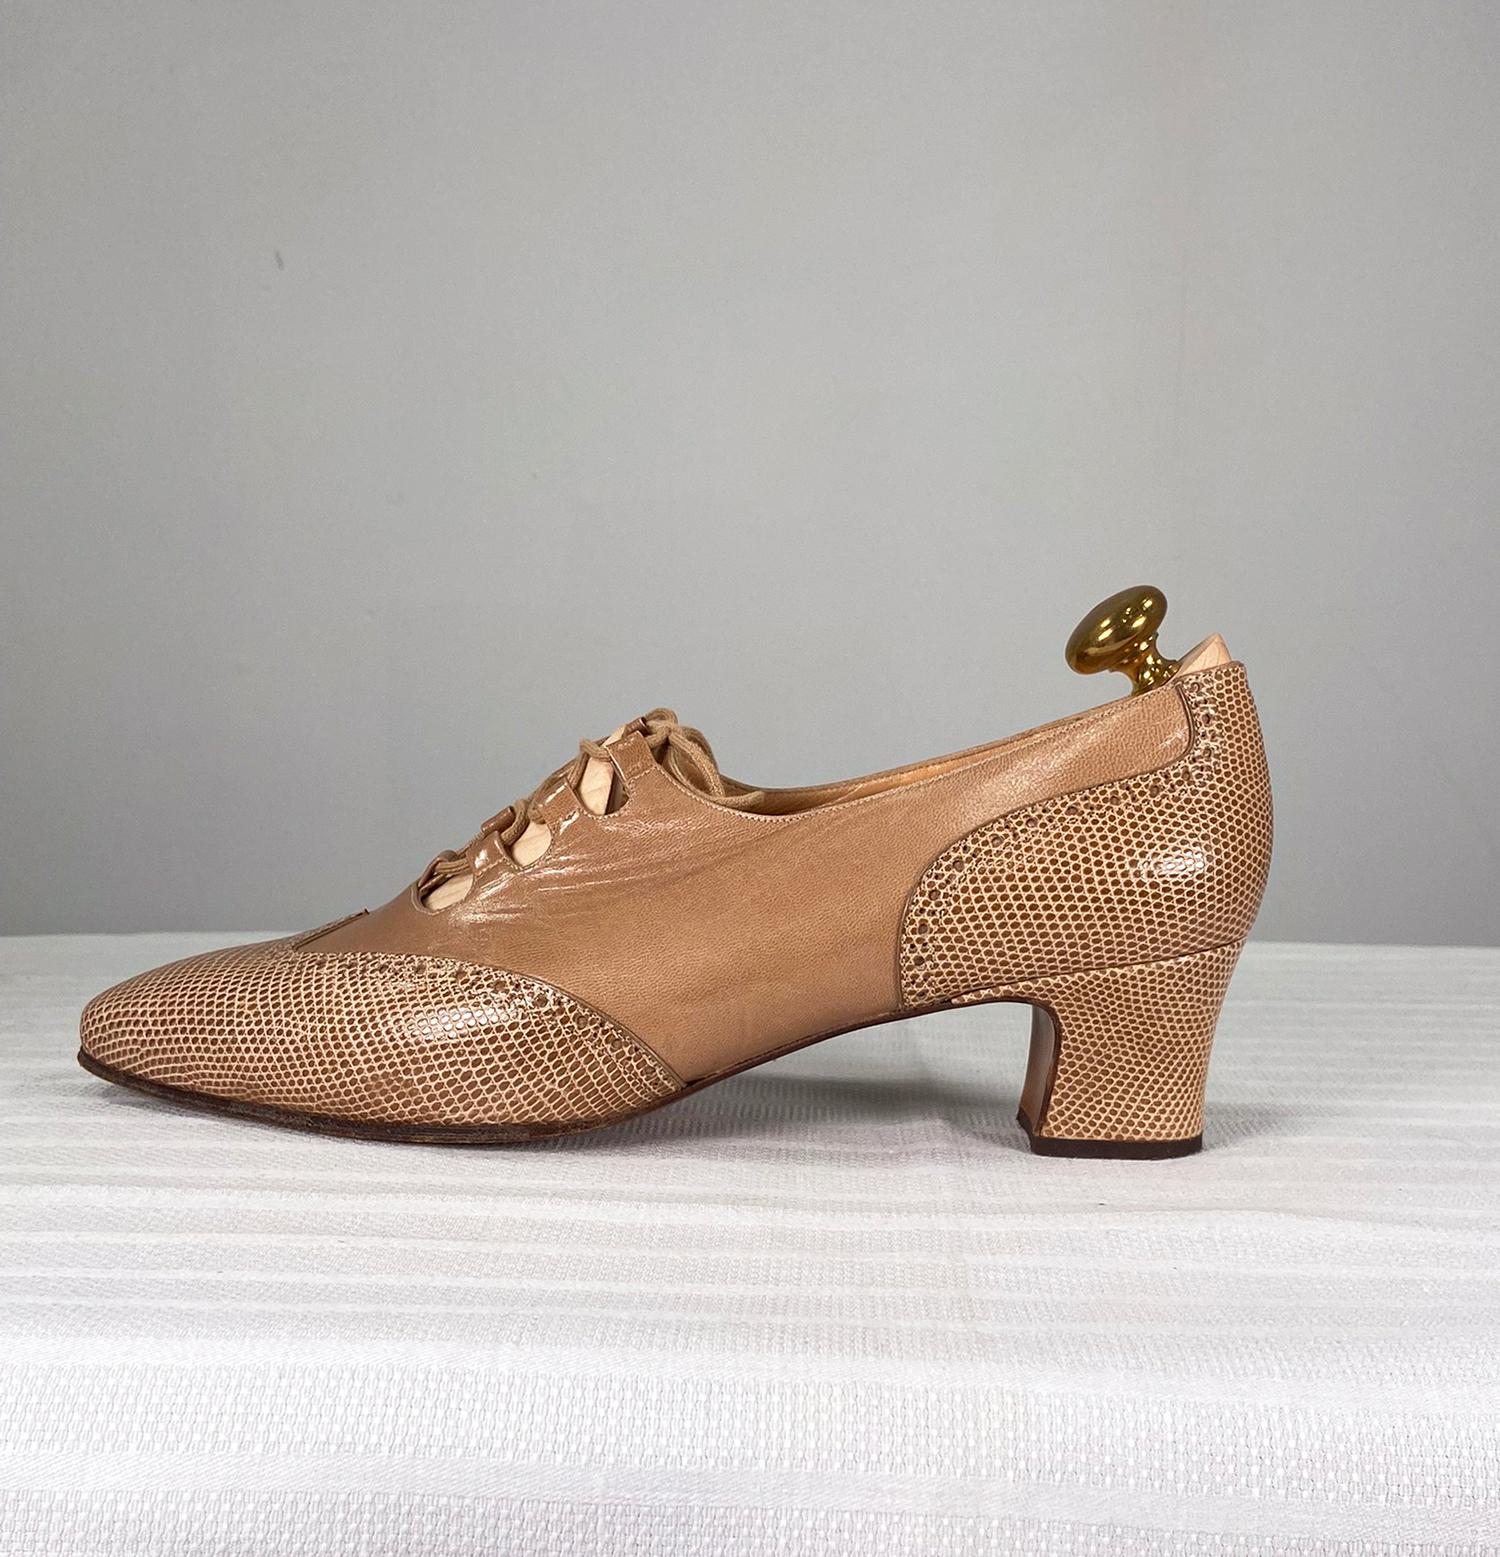 Delage Paris Picasso Tan Lizard & Leather Lace Up Chunky Heel Shoes 39 1/2 In Good Condition For Sale In West Palm Beach, FL